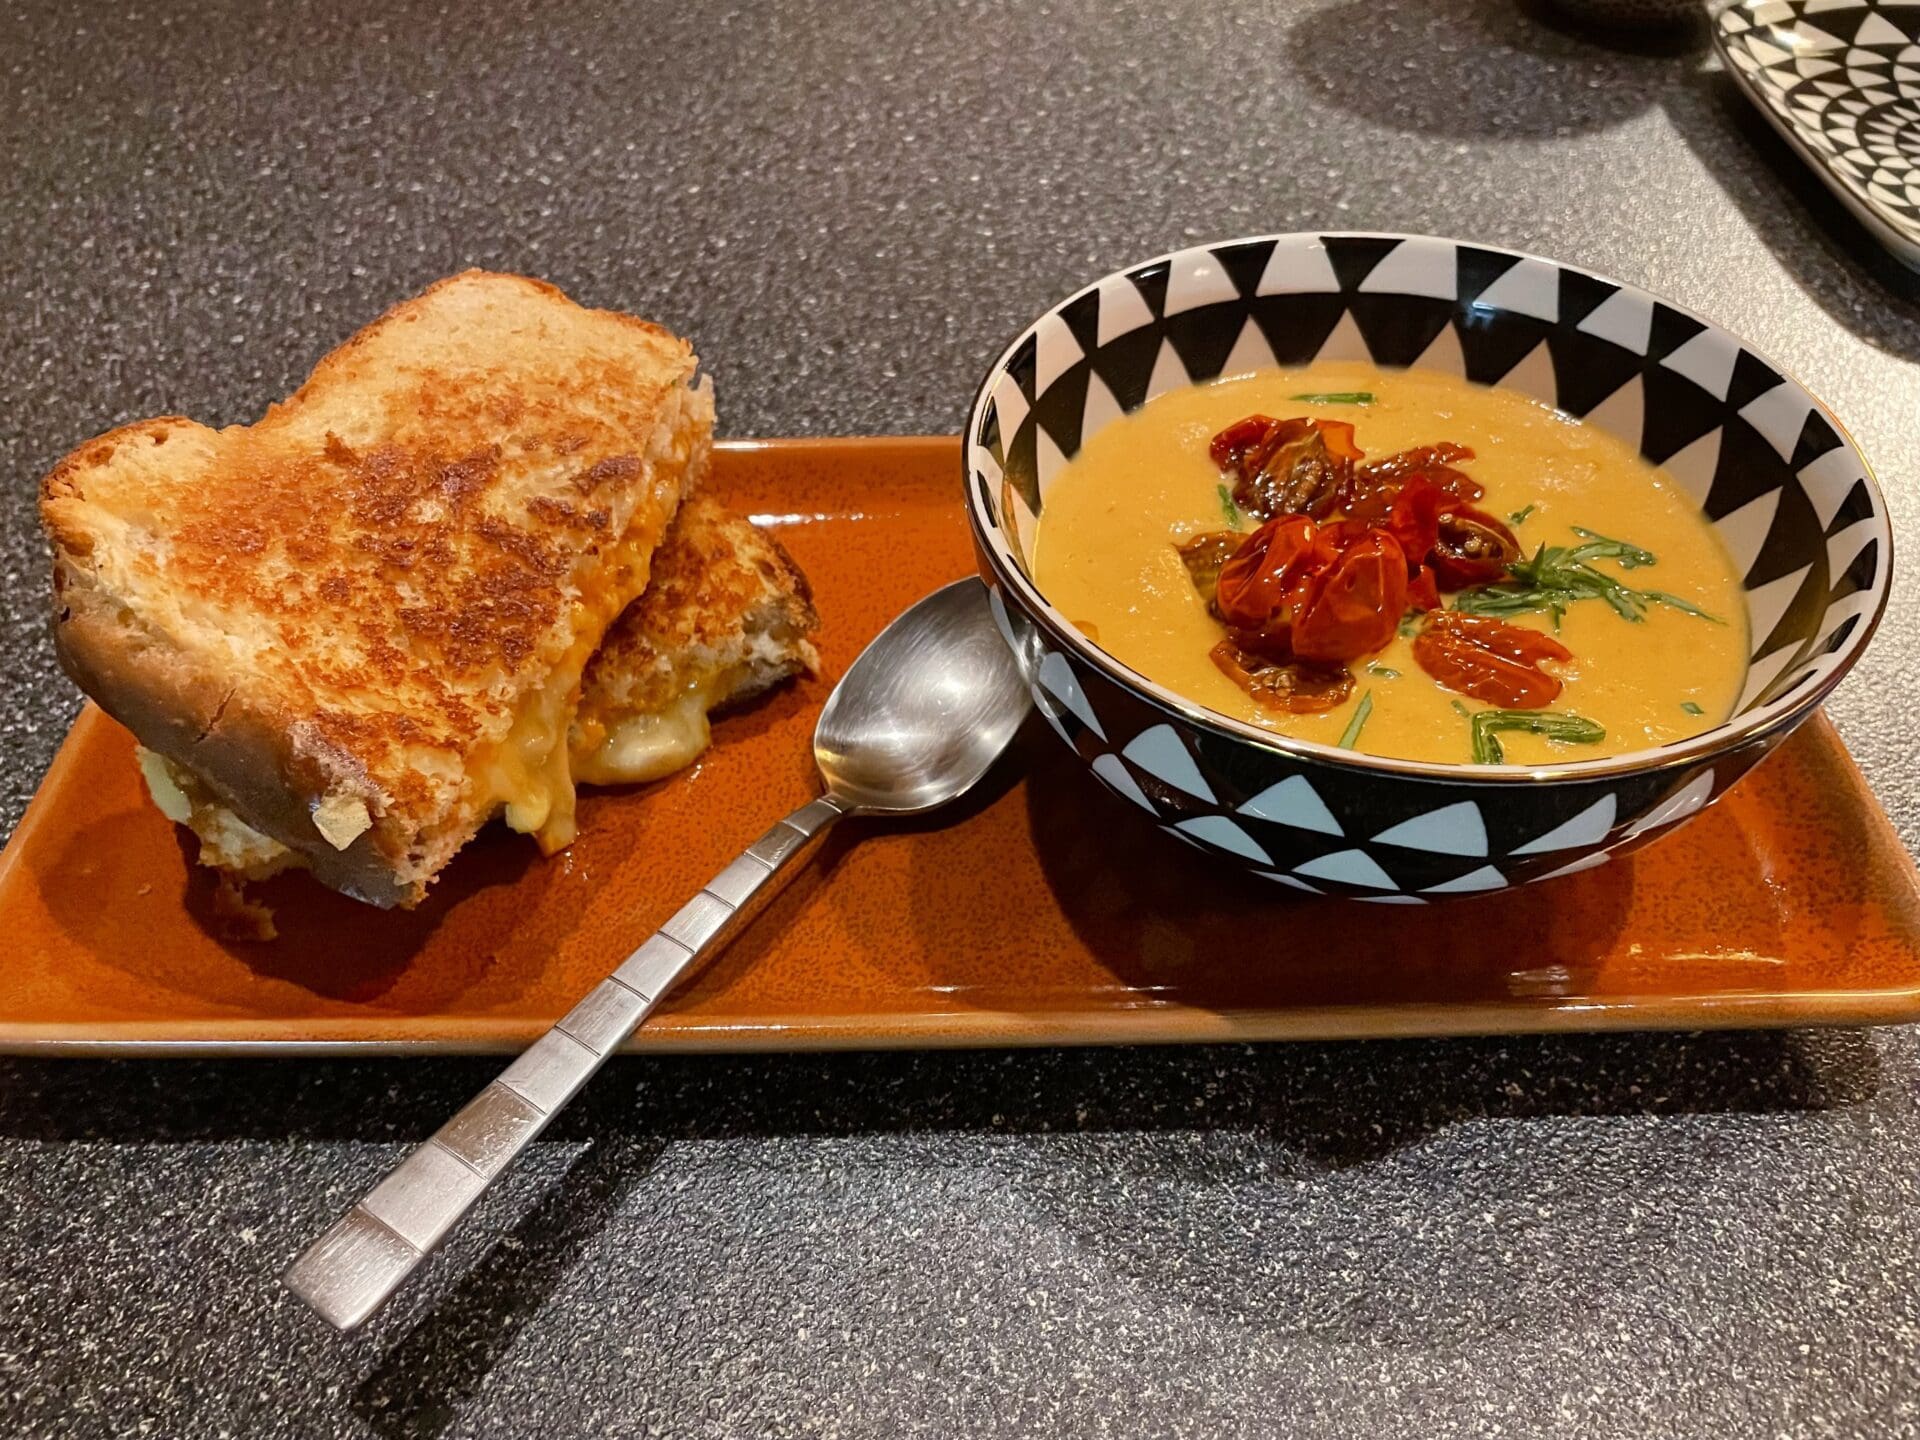 A plate with a grilled sandwich and soup on it, offering delicious recipes.